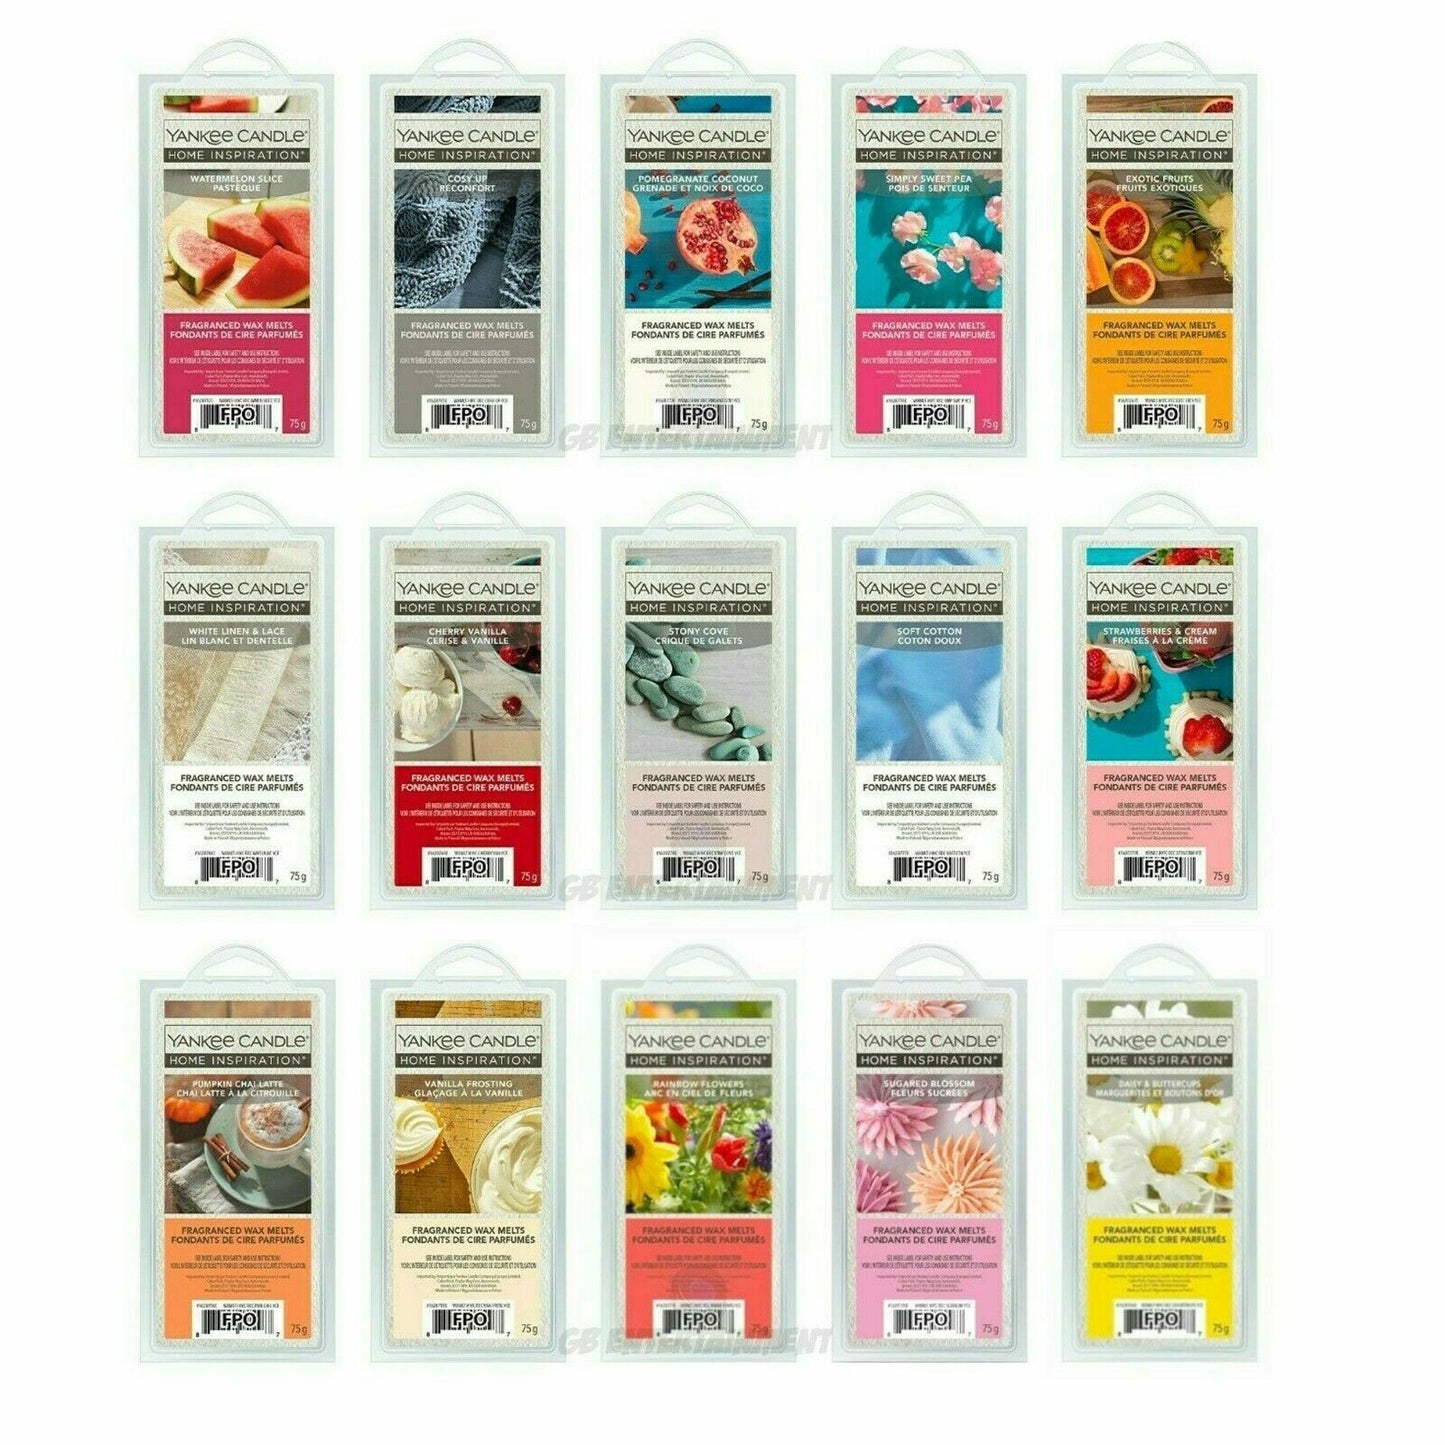 5 Mixed Yankee Candle Fragranced Wax Melts - (30 Cubes)